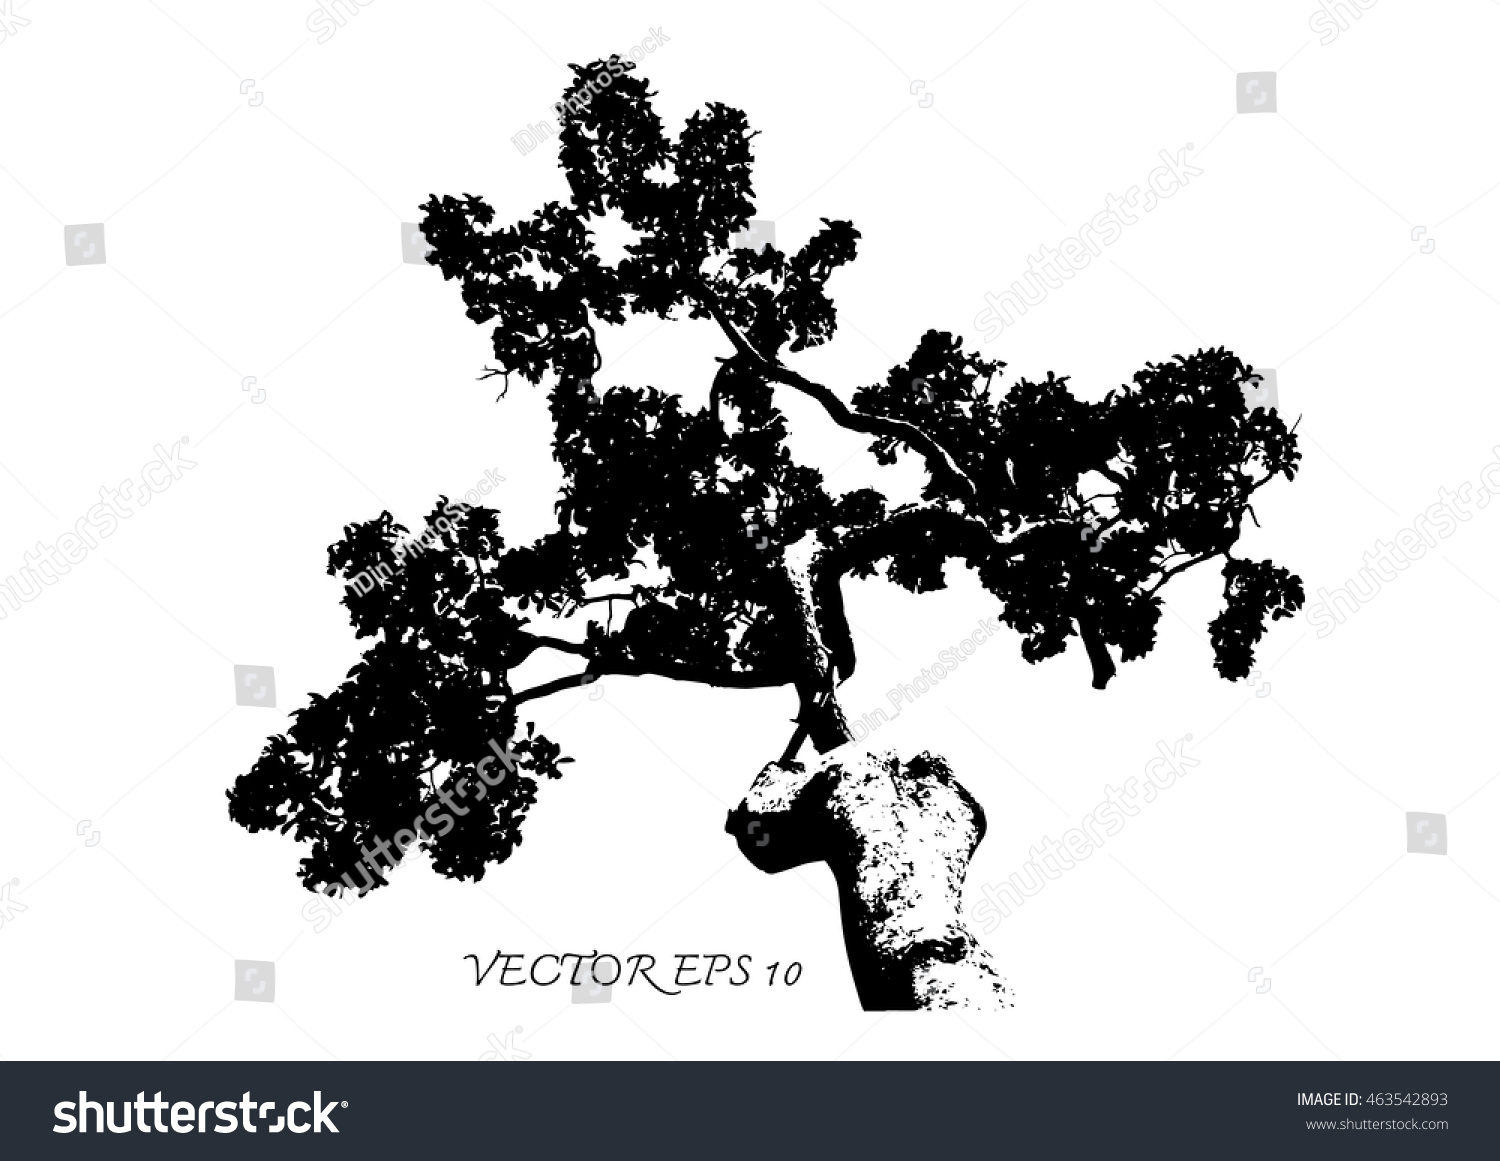 Vector Trees Silhouettes Stock Vector 463542893 - Shutterstock